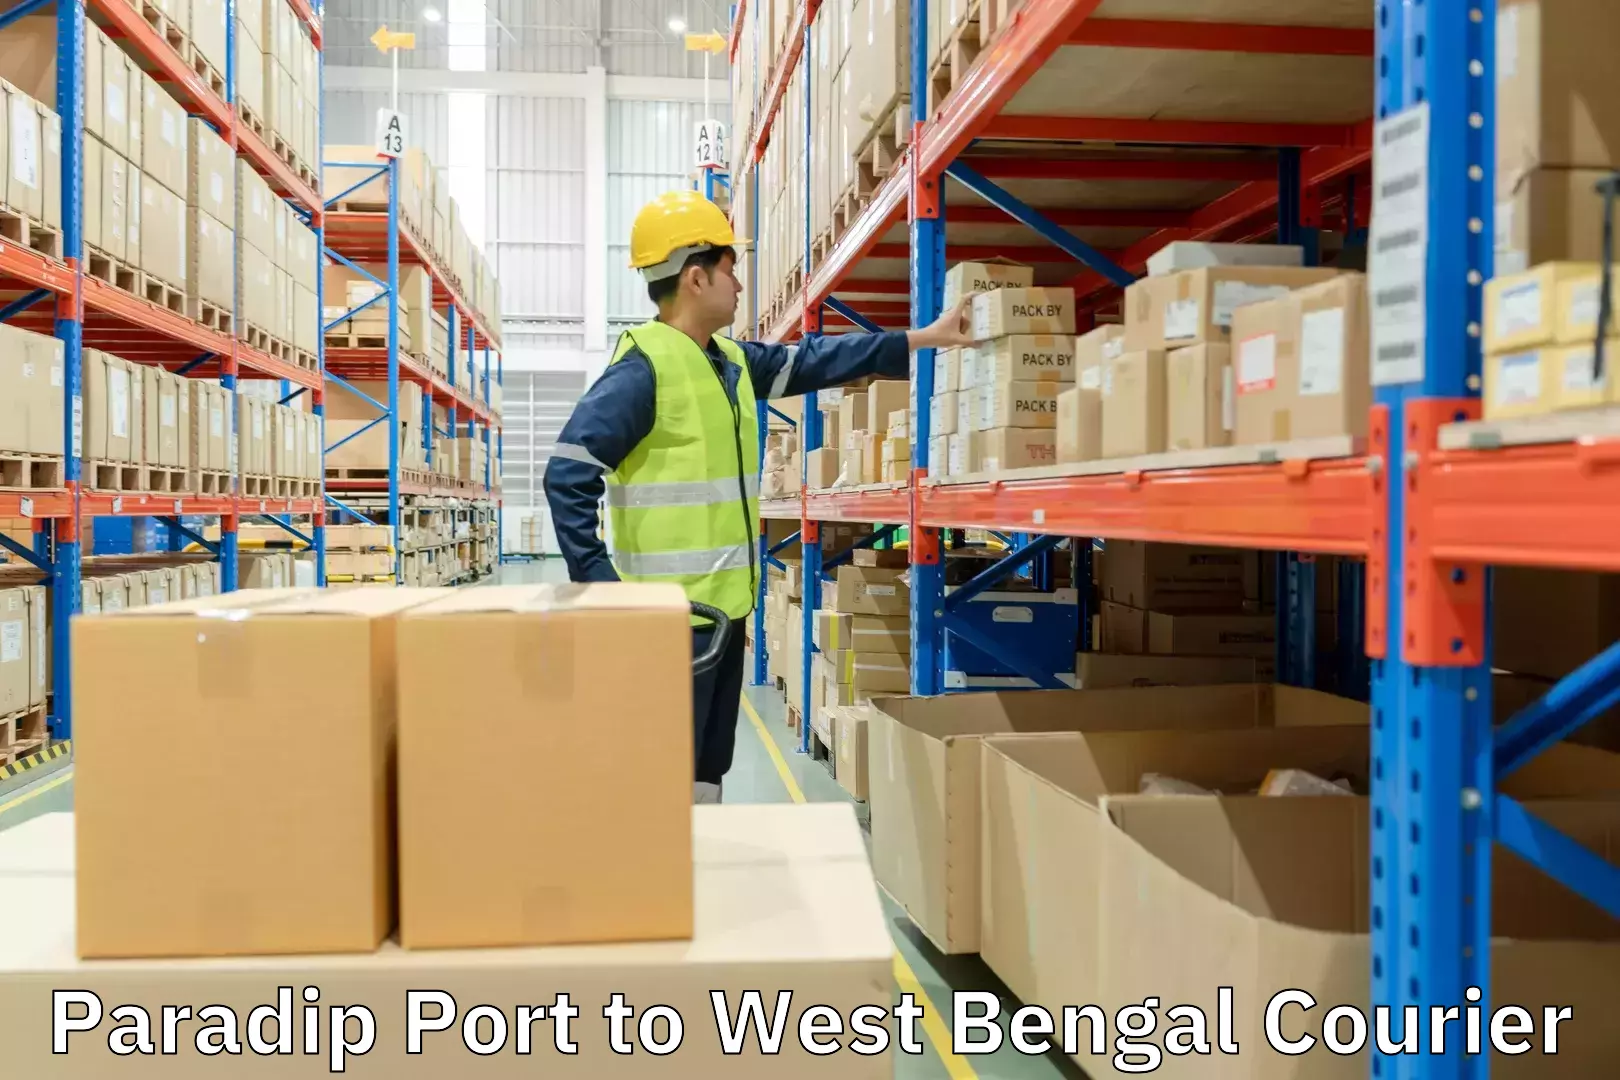 High-speed parcel service Paradip Port to West Bengal